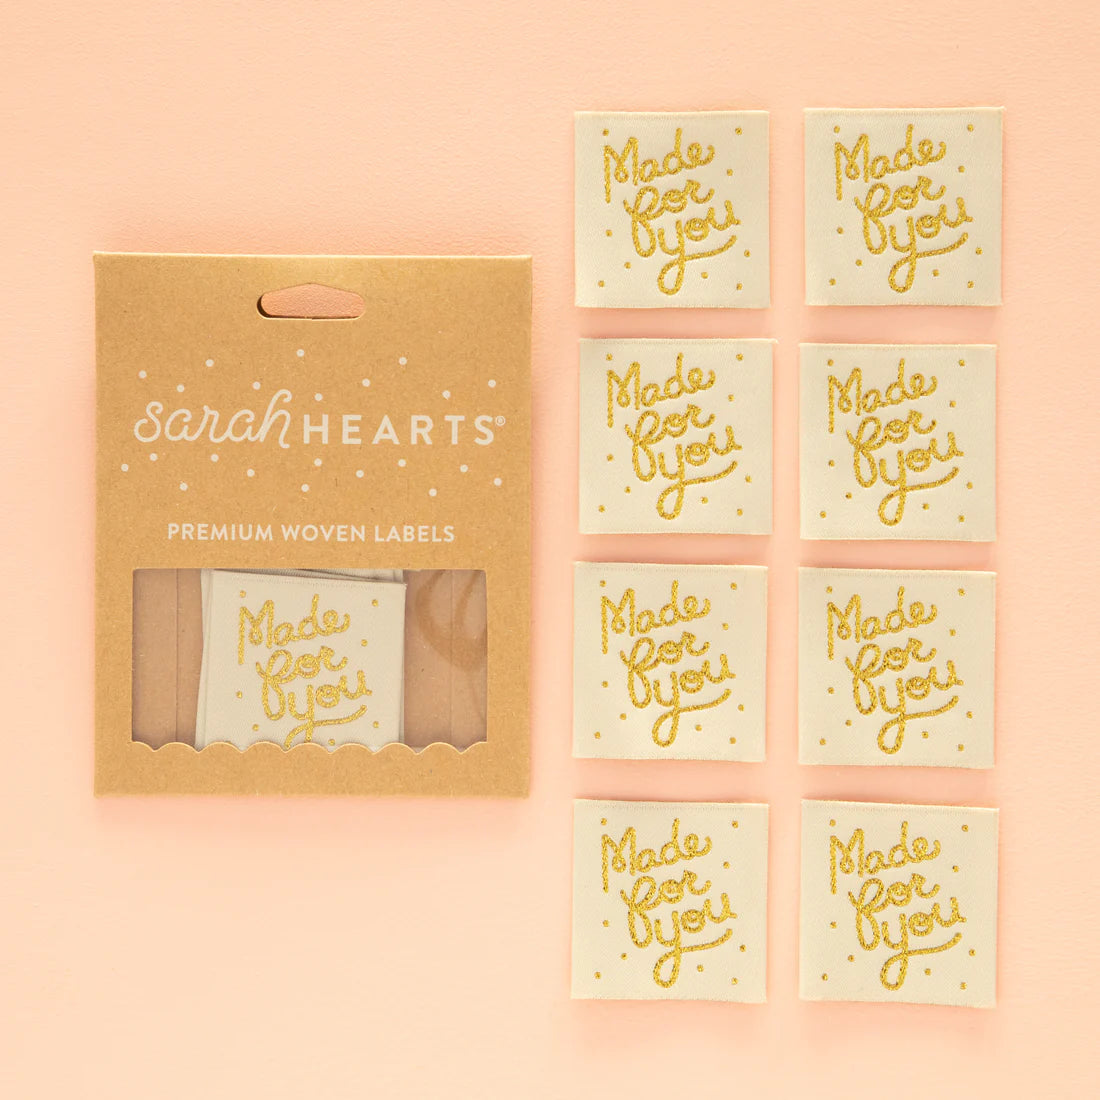 Made for You Gold Woven Labels - by Sarah Hearts